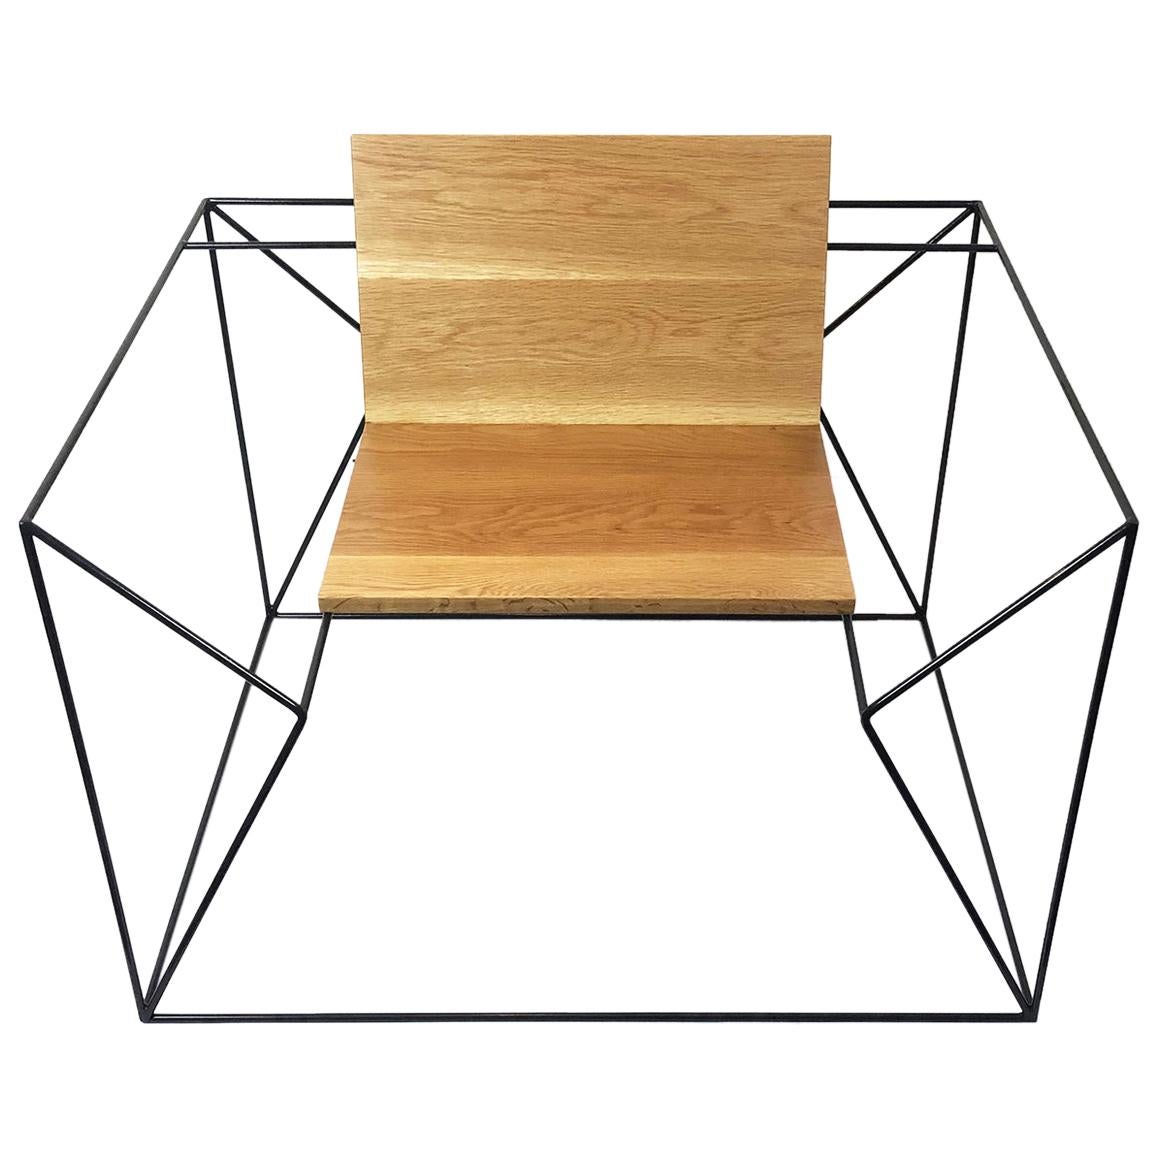 "Q-bo - Chair" by Luis Ricaurte, Edition of 20 Numbered Pieces